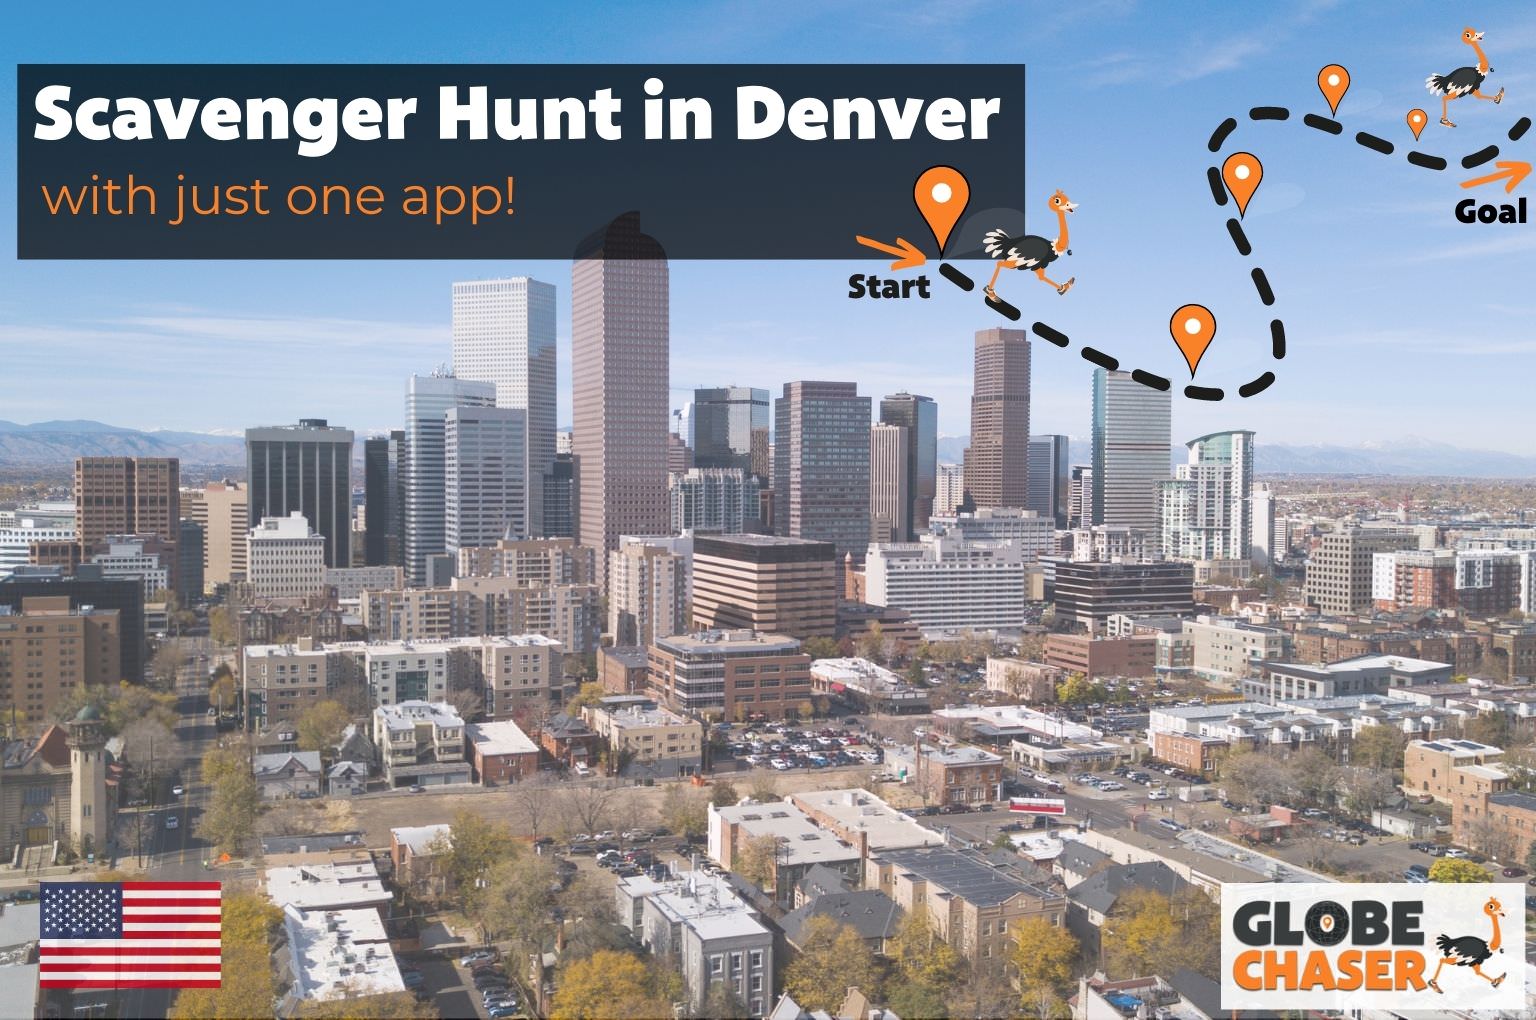 Scavenger Hunt in Denver, USA - Family Activities with the Globe Chaser App for Outdoor Fun